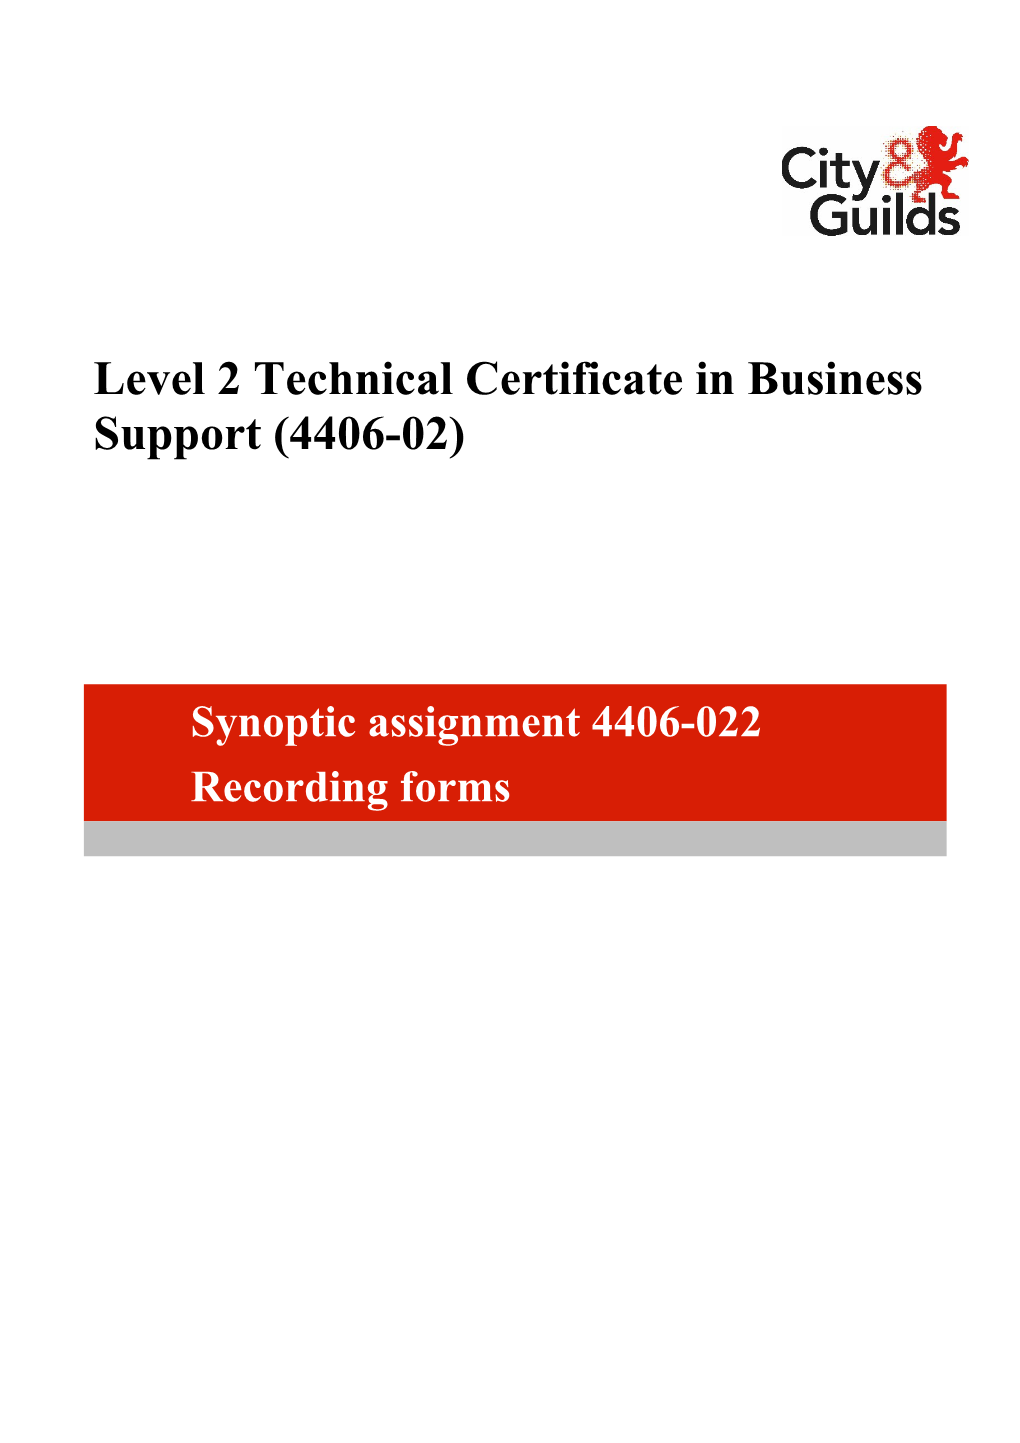 Level 2 Technical Certificate in Business Support (4406-02)